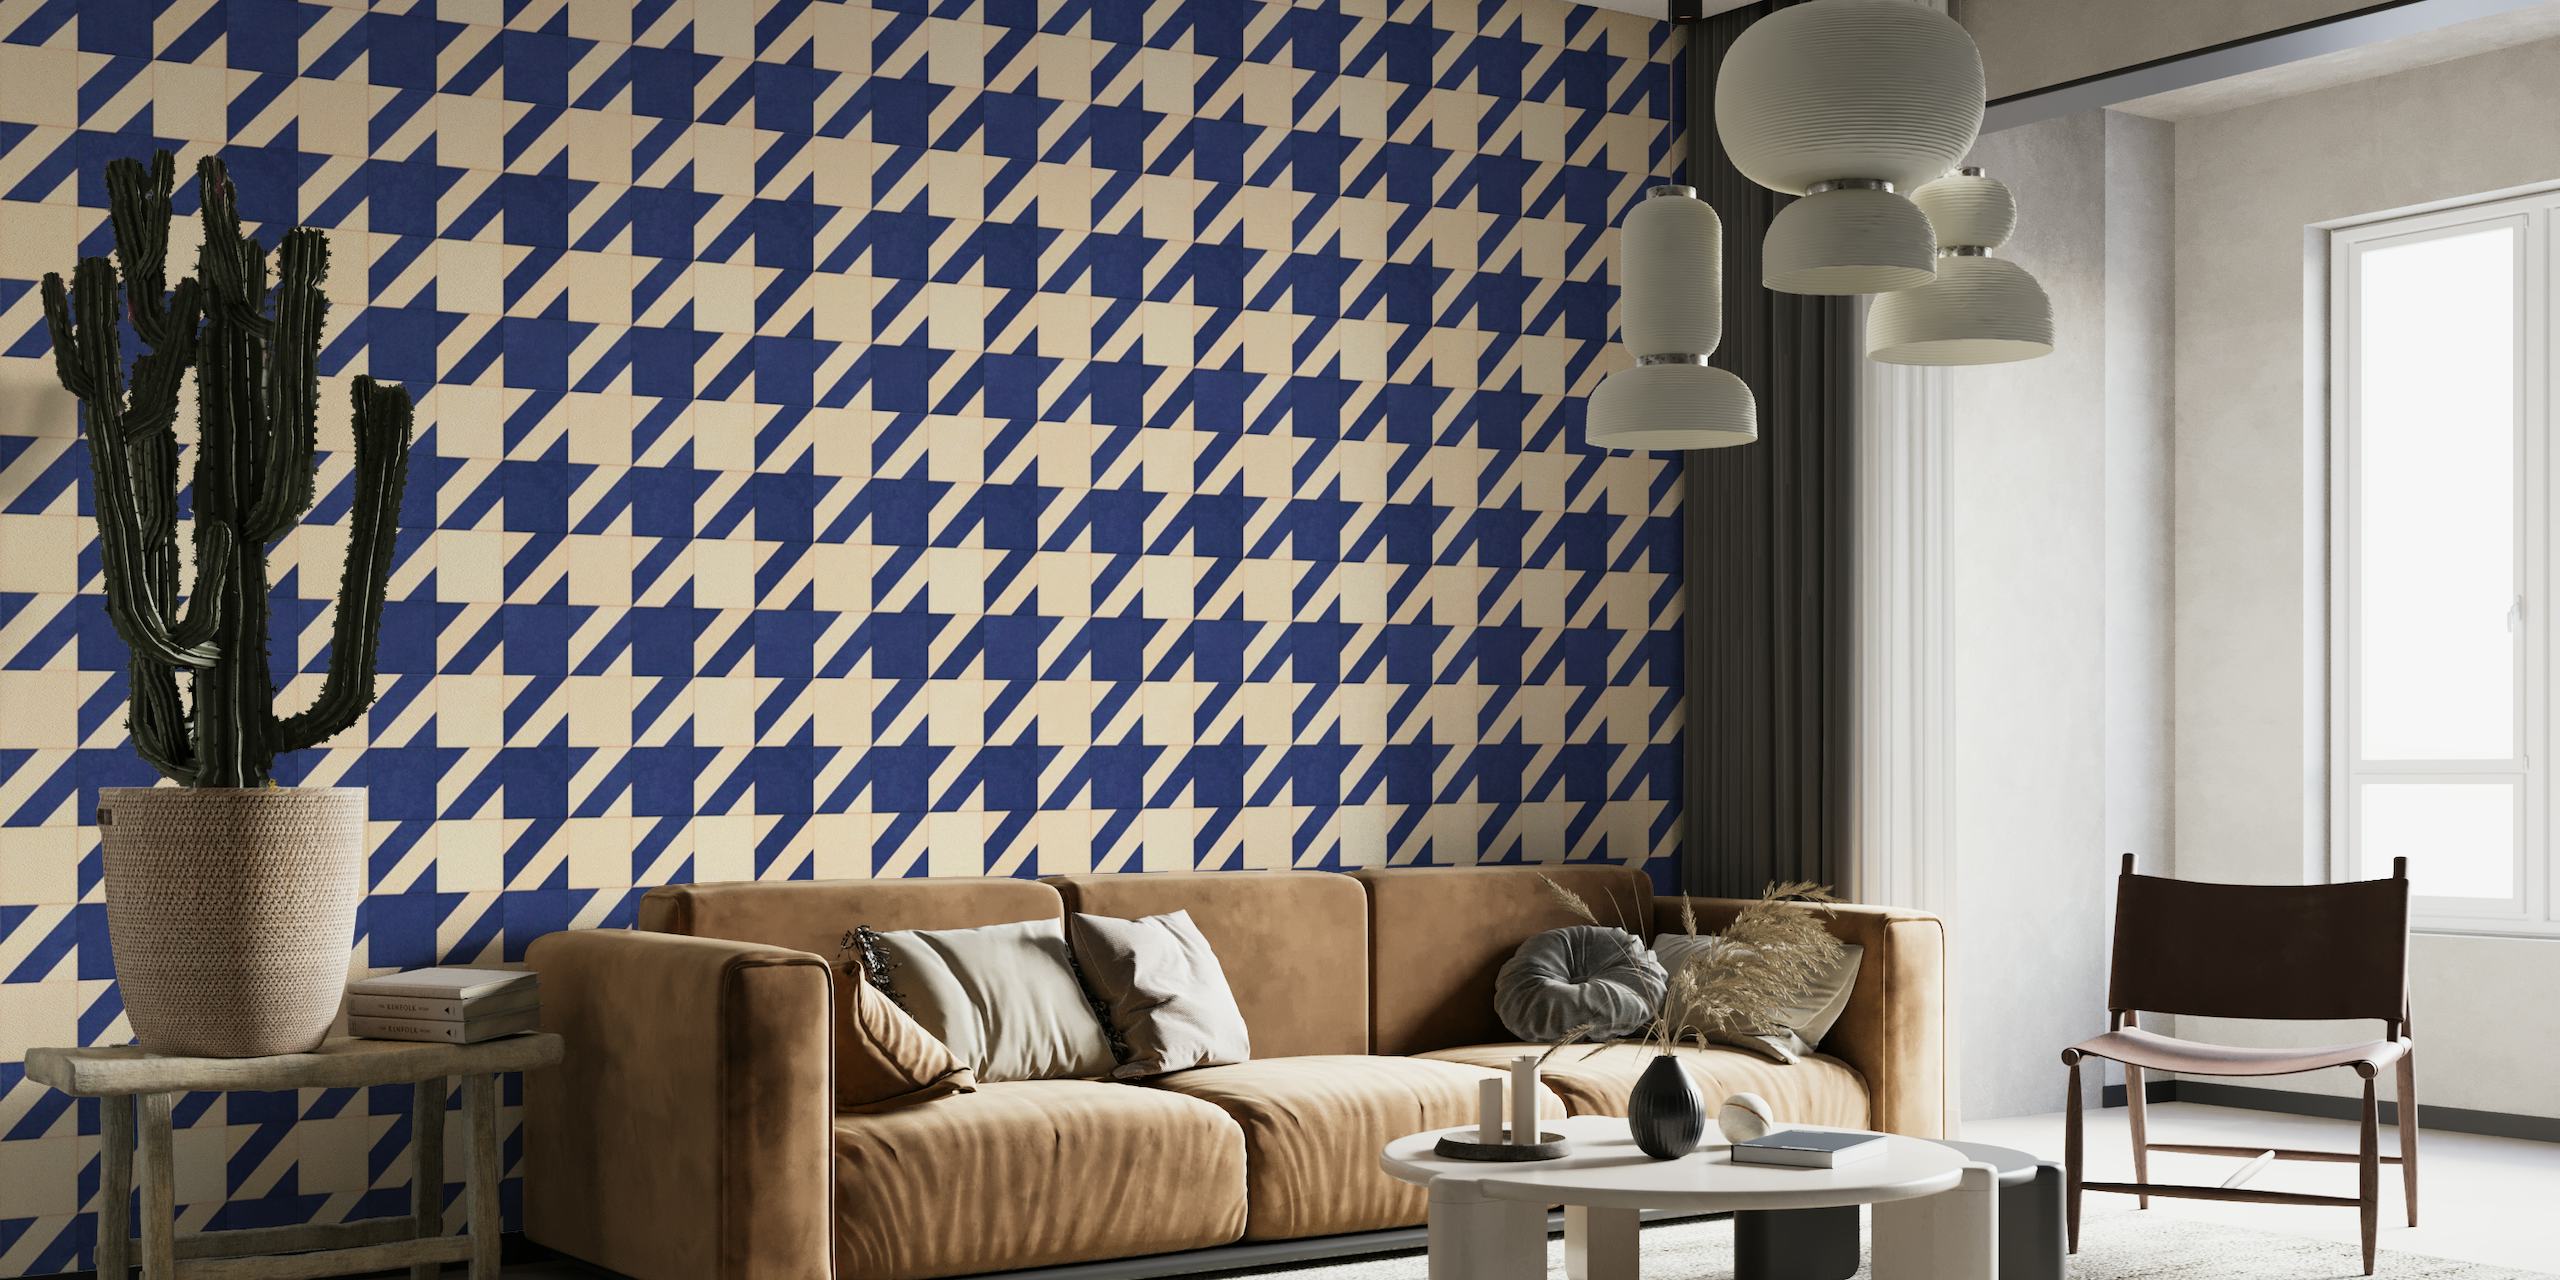 TILES 011 A - Houndstooth ταπετσαρία